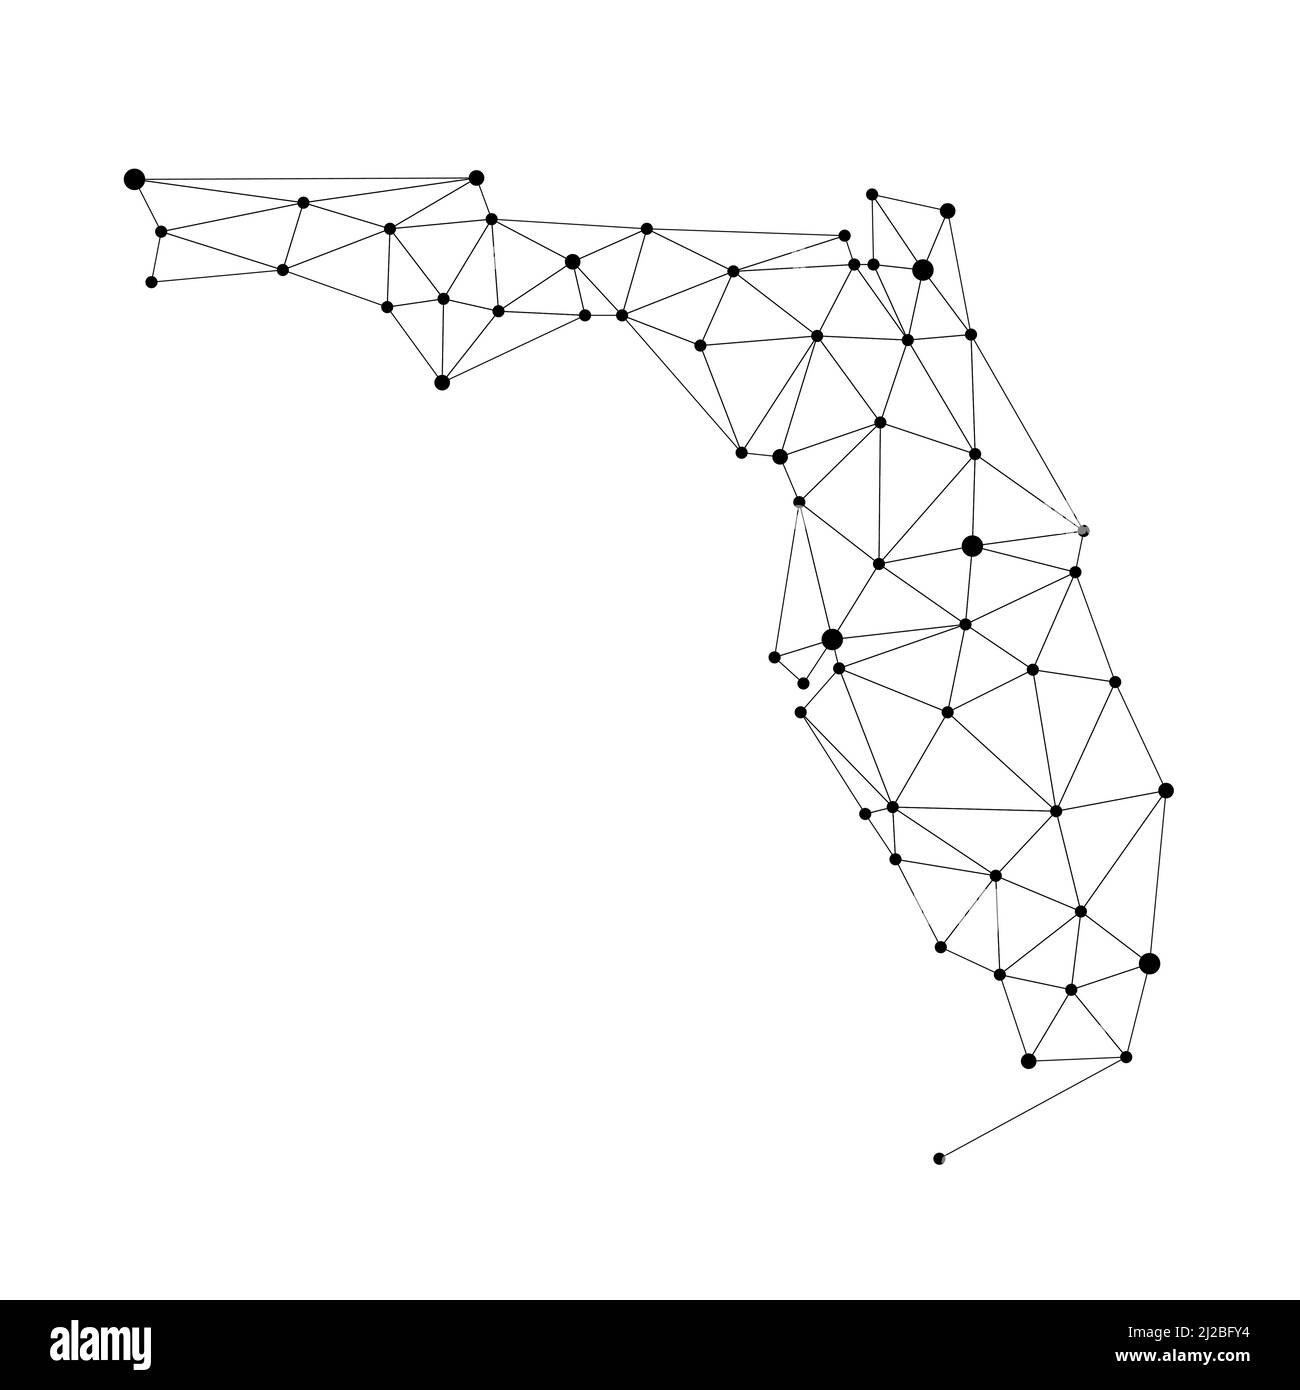 Florida polygonal map. Abstract geometric connected dots vector map. Low poly style. Stock Vector